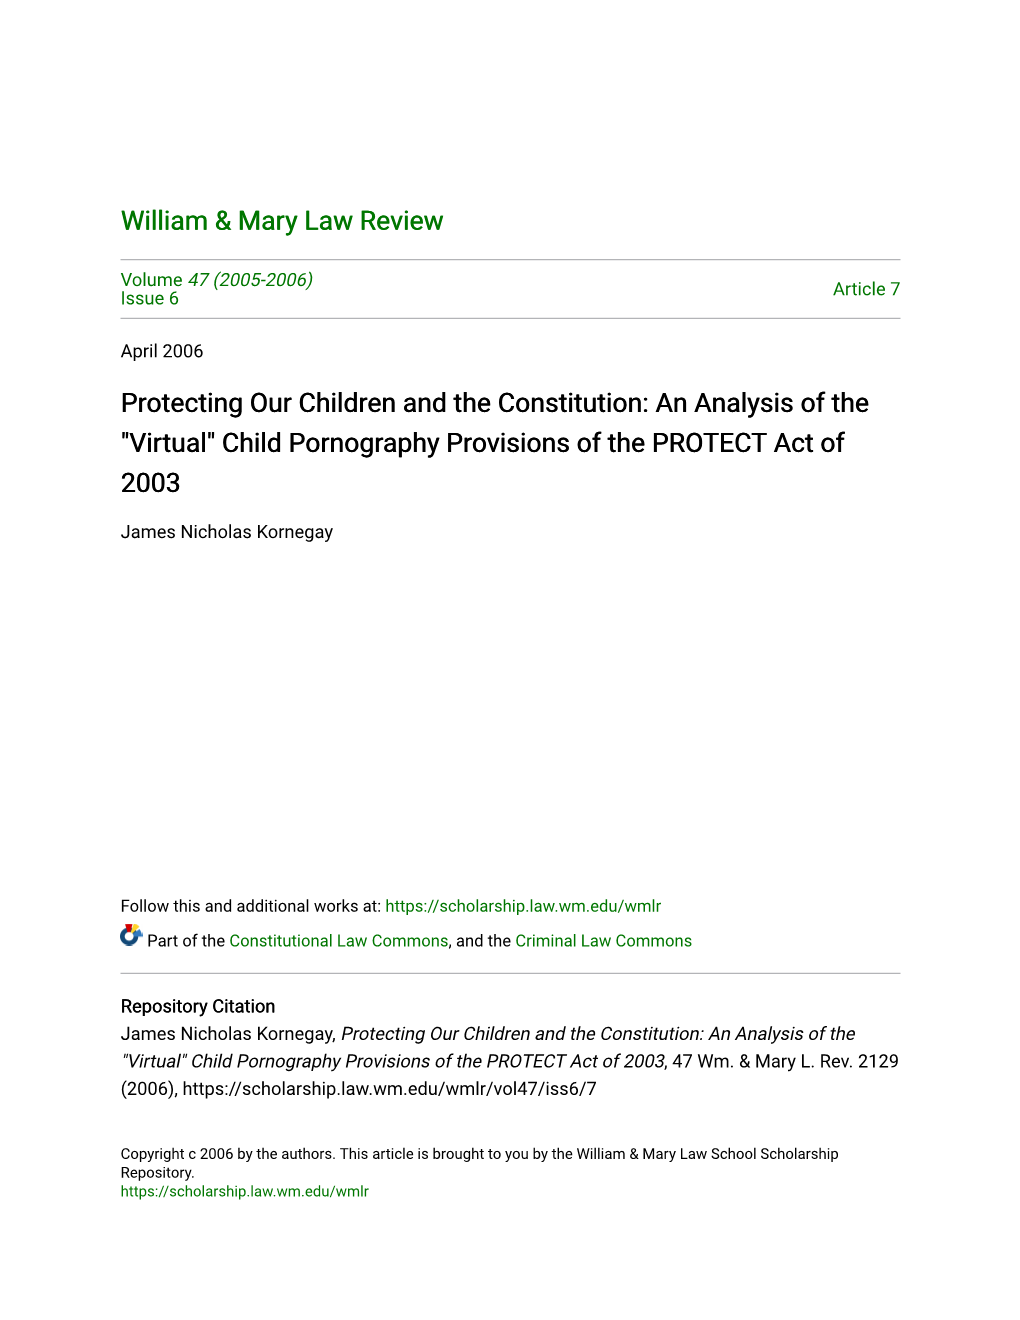 An Analysis of the "Virtual" Child Pornography Provisions of the PROTECT Act of 2003